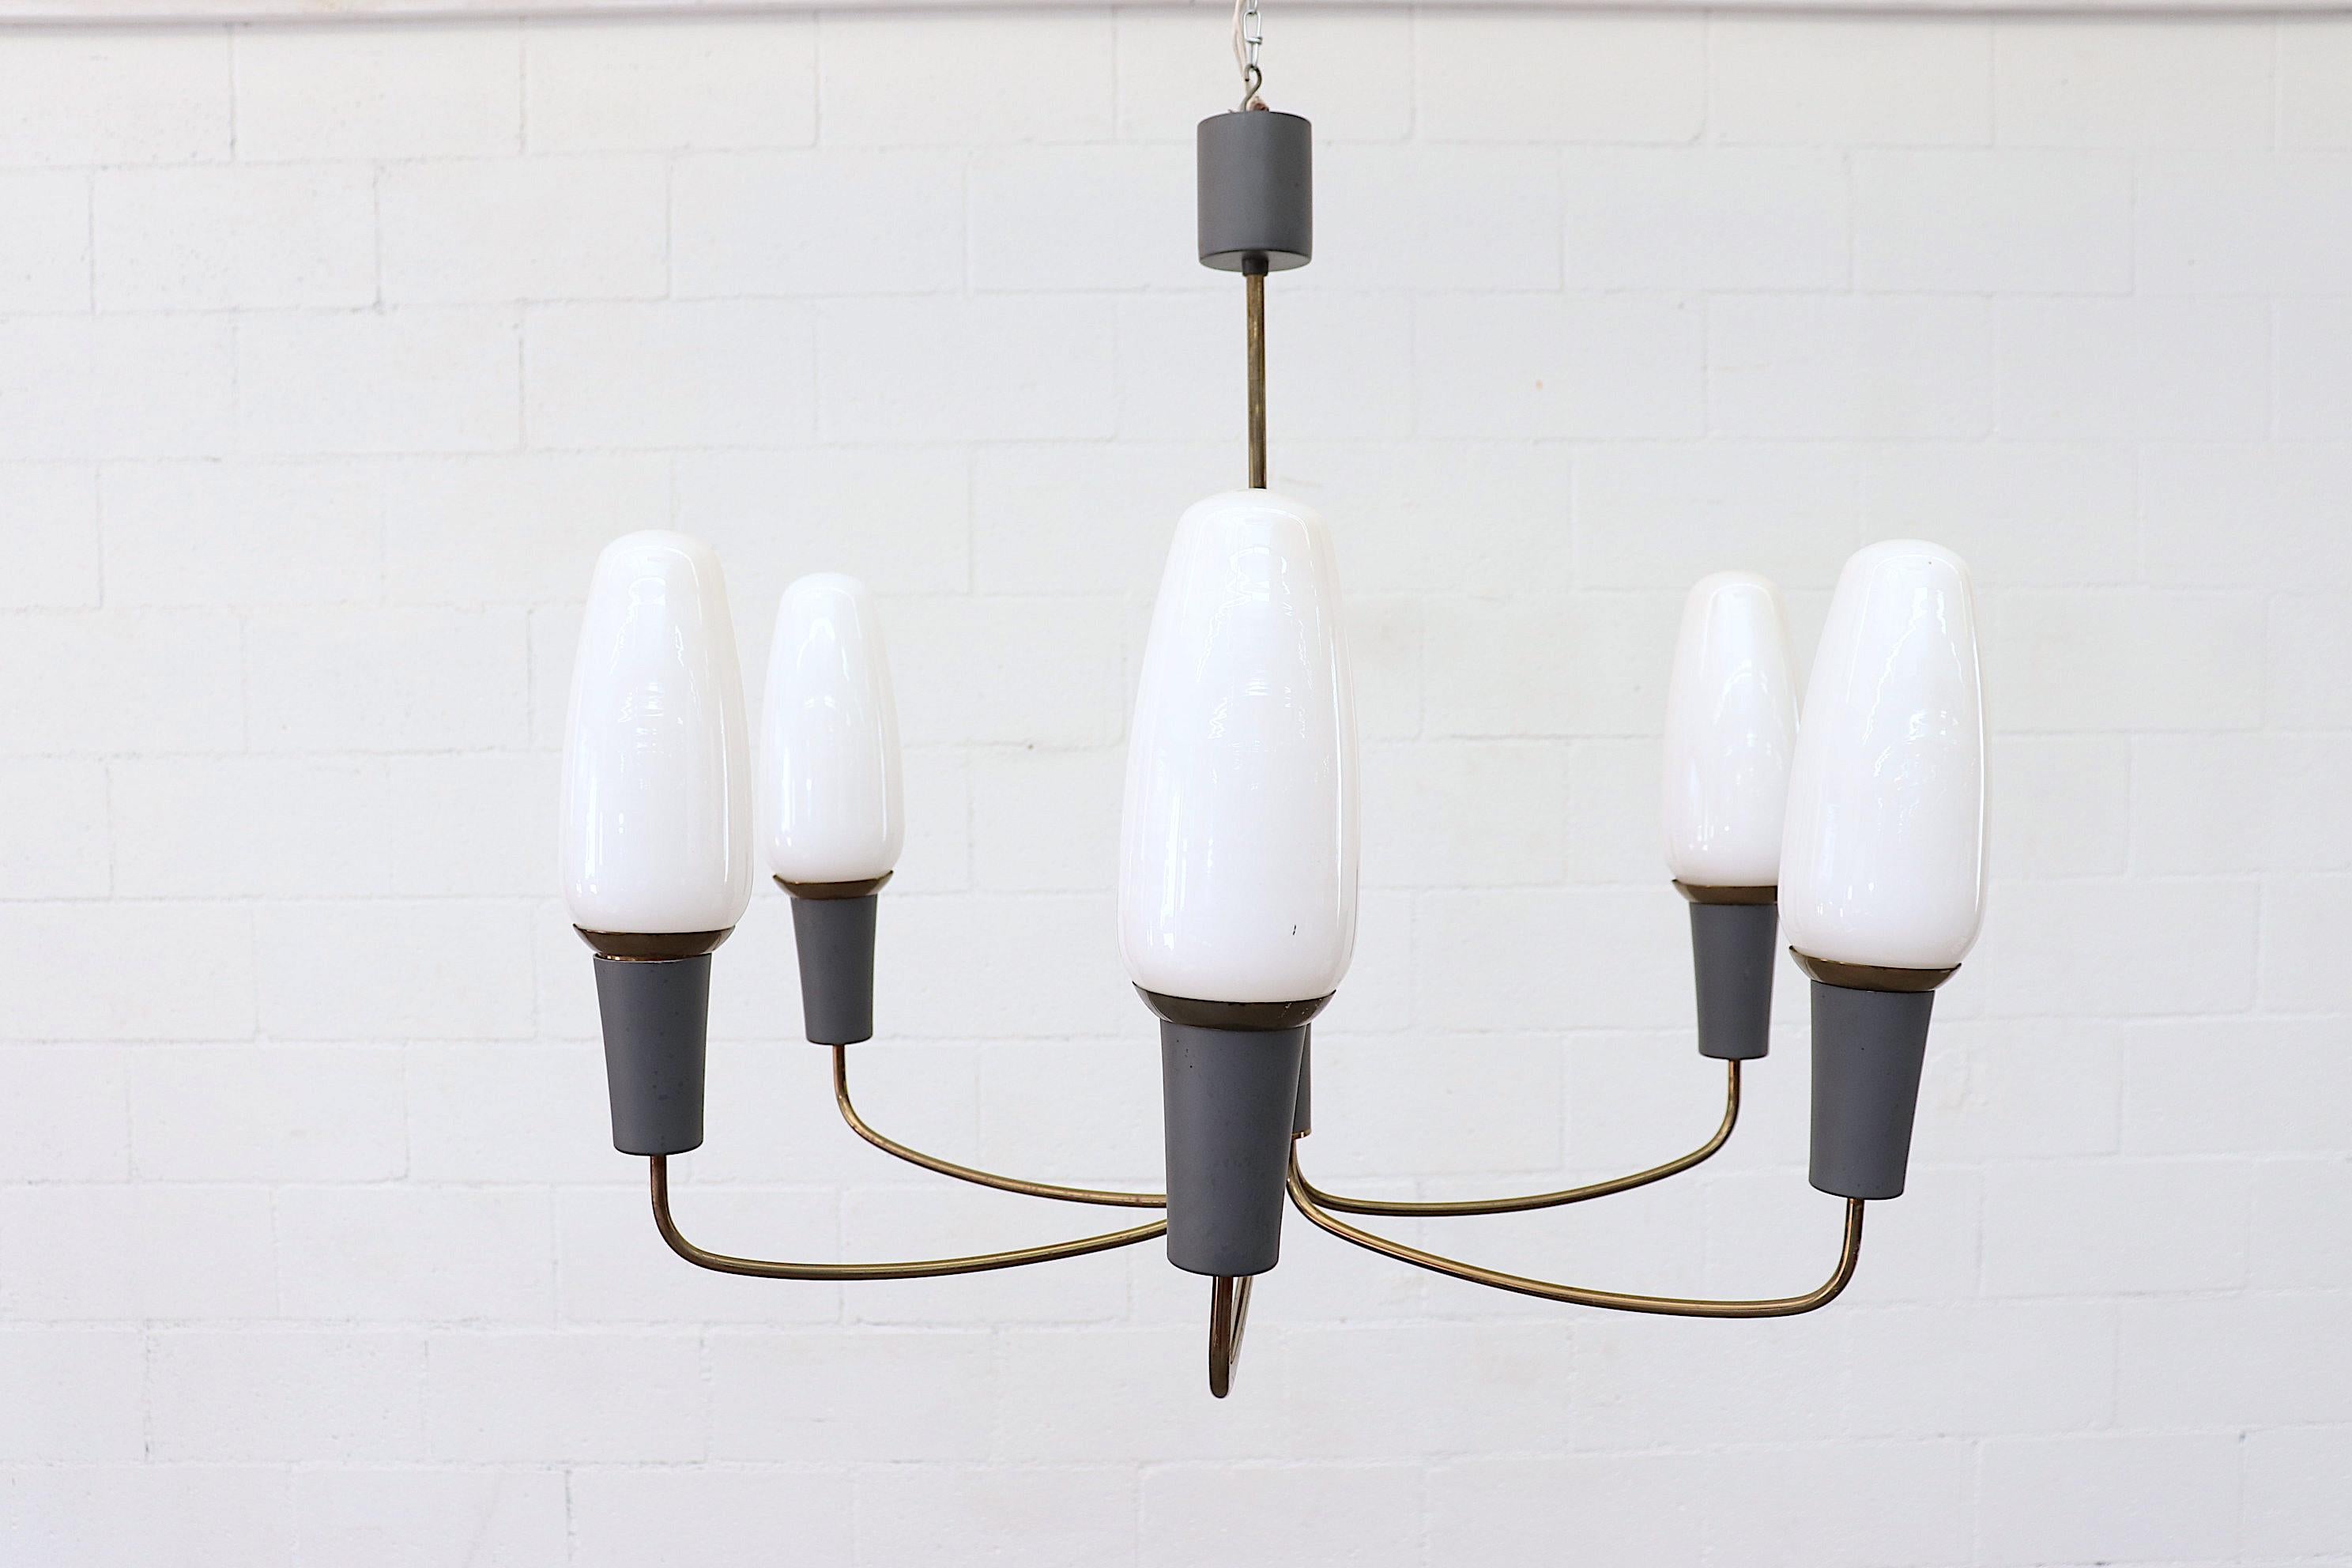 Rare, mid-century Philips ceiling chandelier. Handsome and multi-armed, this piece features blue-grey enameled fittings and brass arms. It is important to note that these are actual glass light bulbs seated in the fittings and not shades. That means